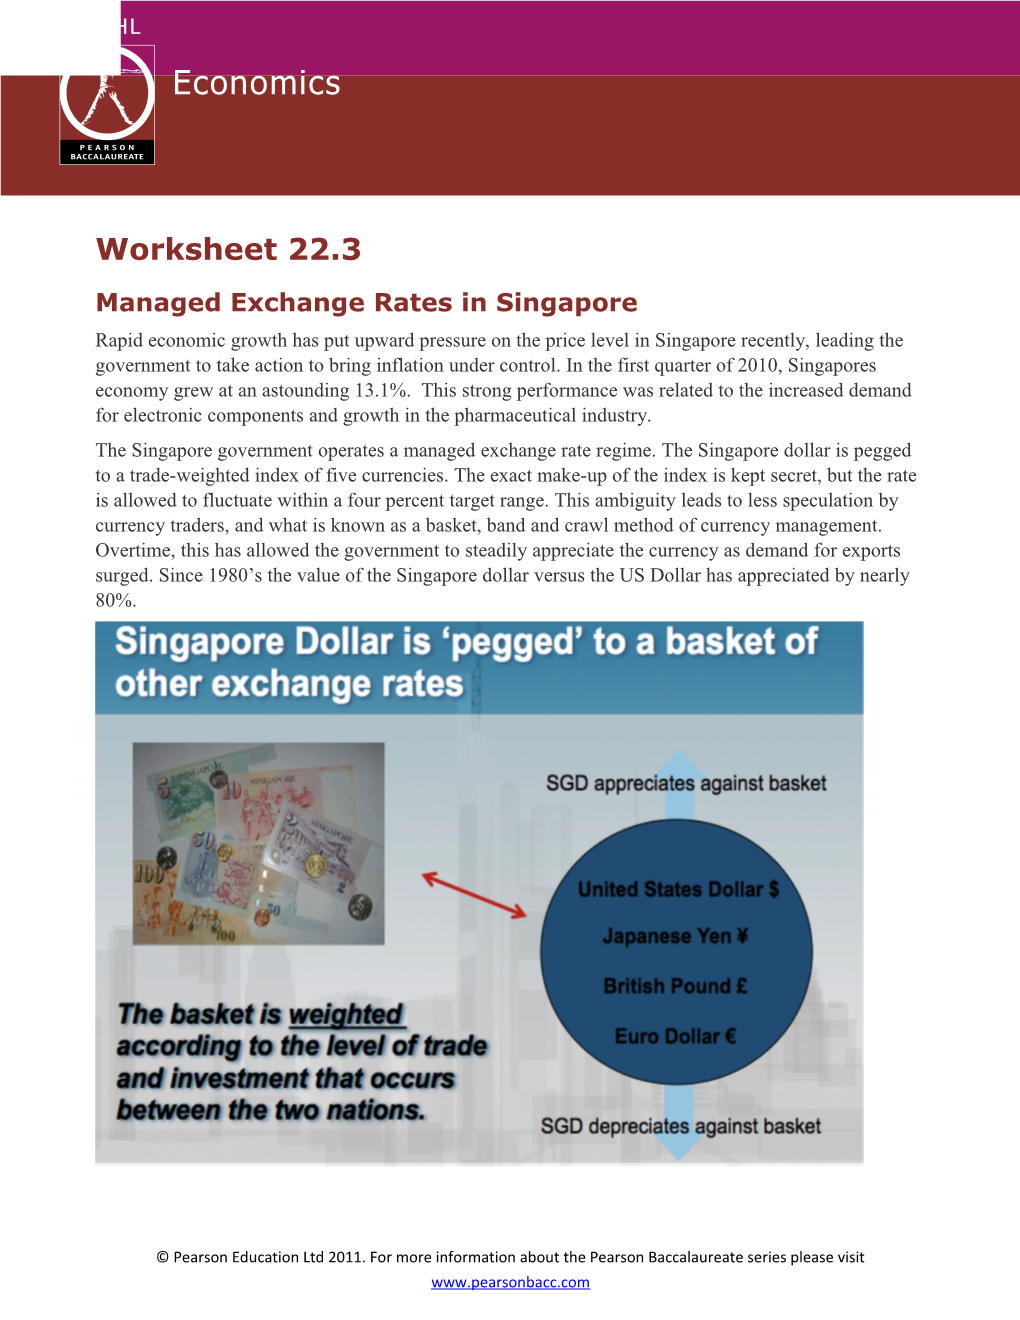 Managed Exchange Rates in Singapore